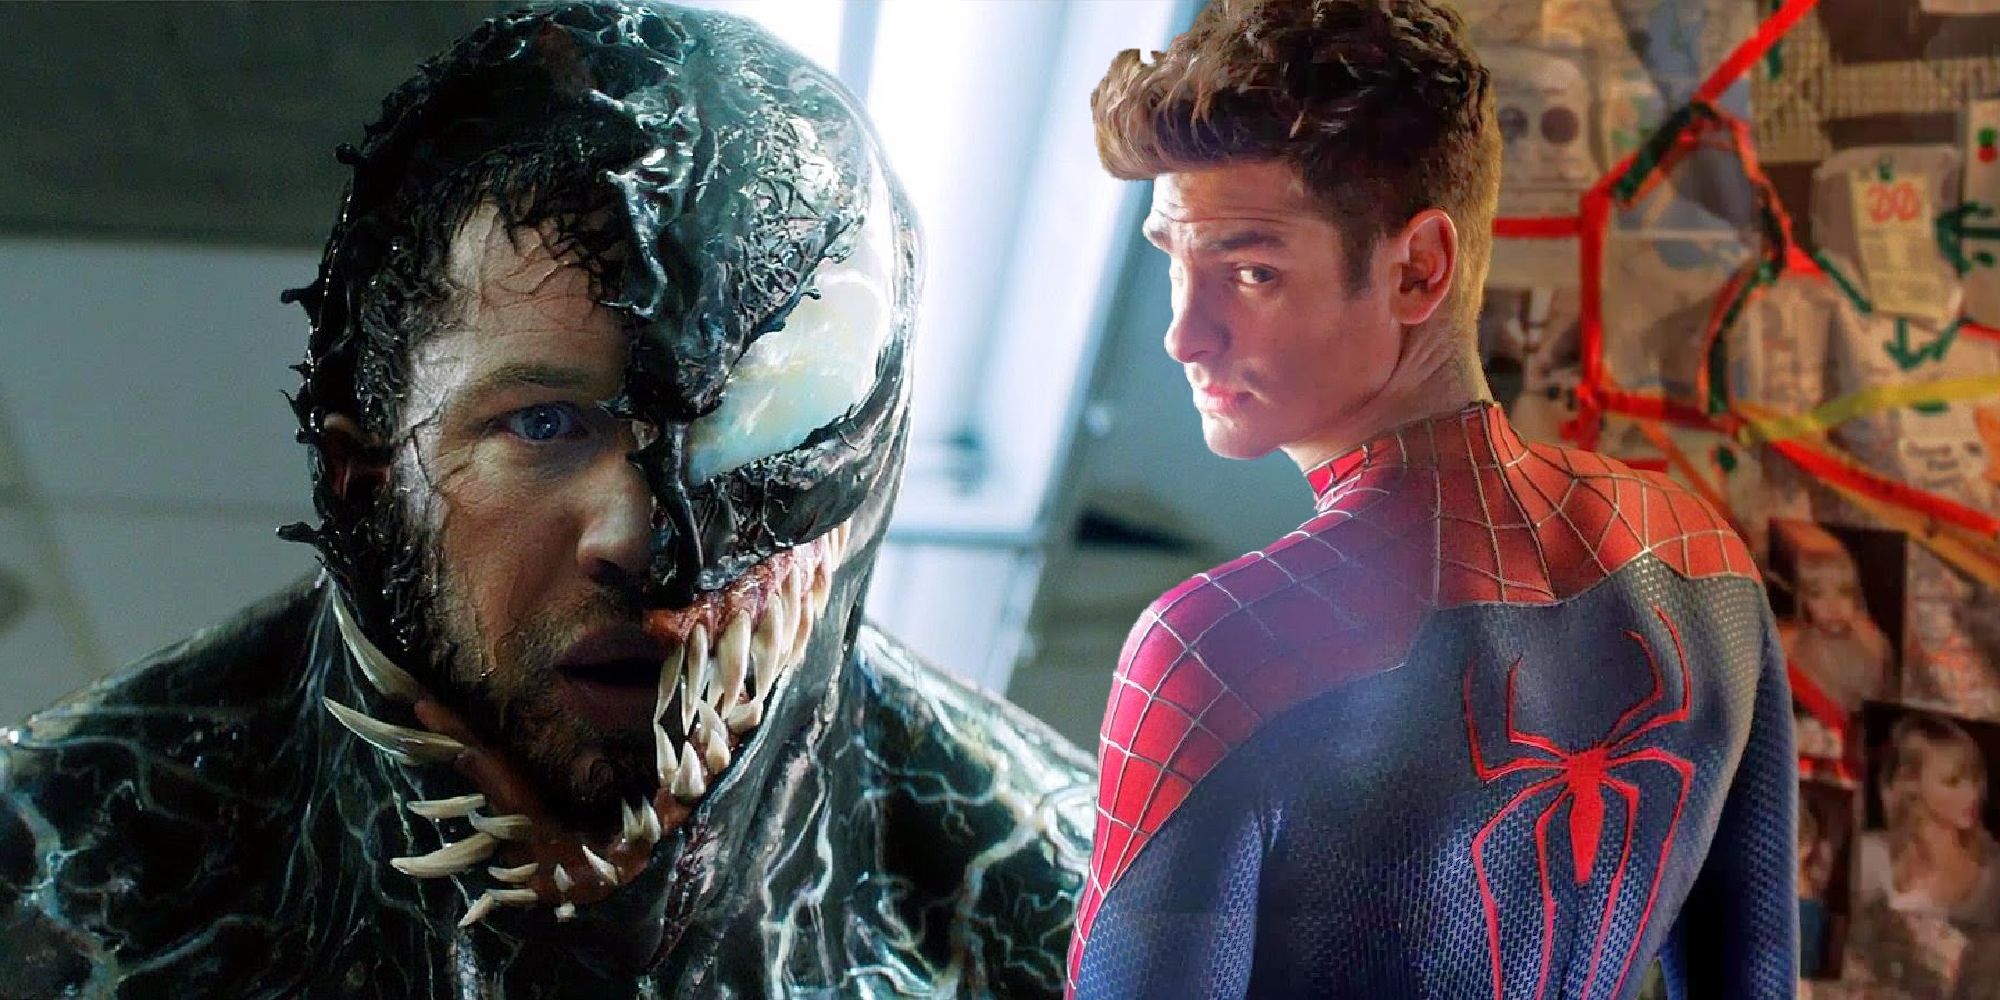 Superimposed image of Venom and Andrew Garfield as Spider-Man.